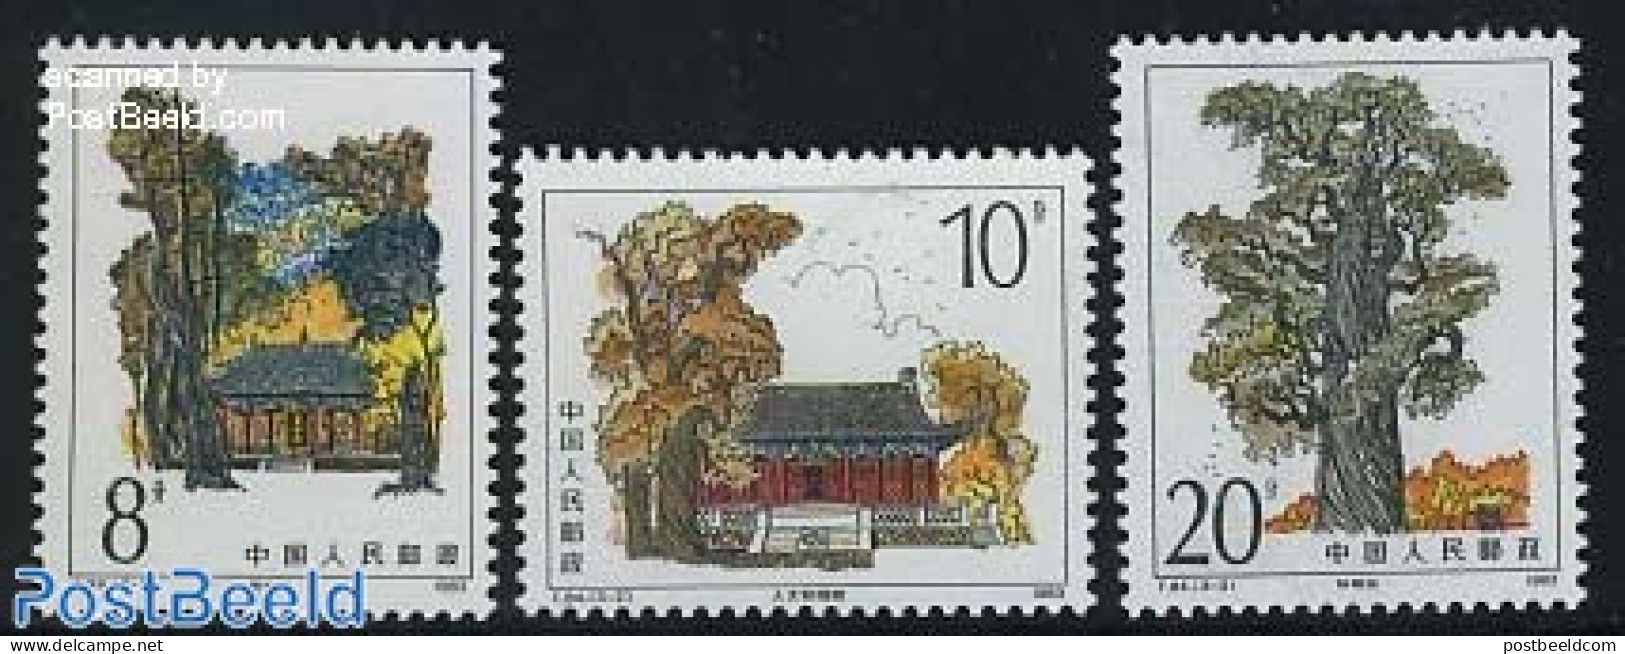 China People’s Republic 1983 Emperors Grave 3v, Mint NH, Nature - Trees & Forests - Nuevos